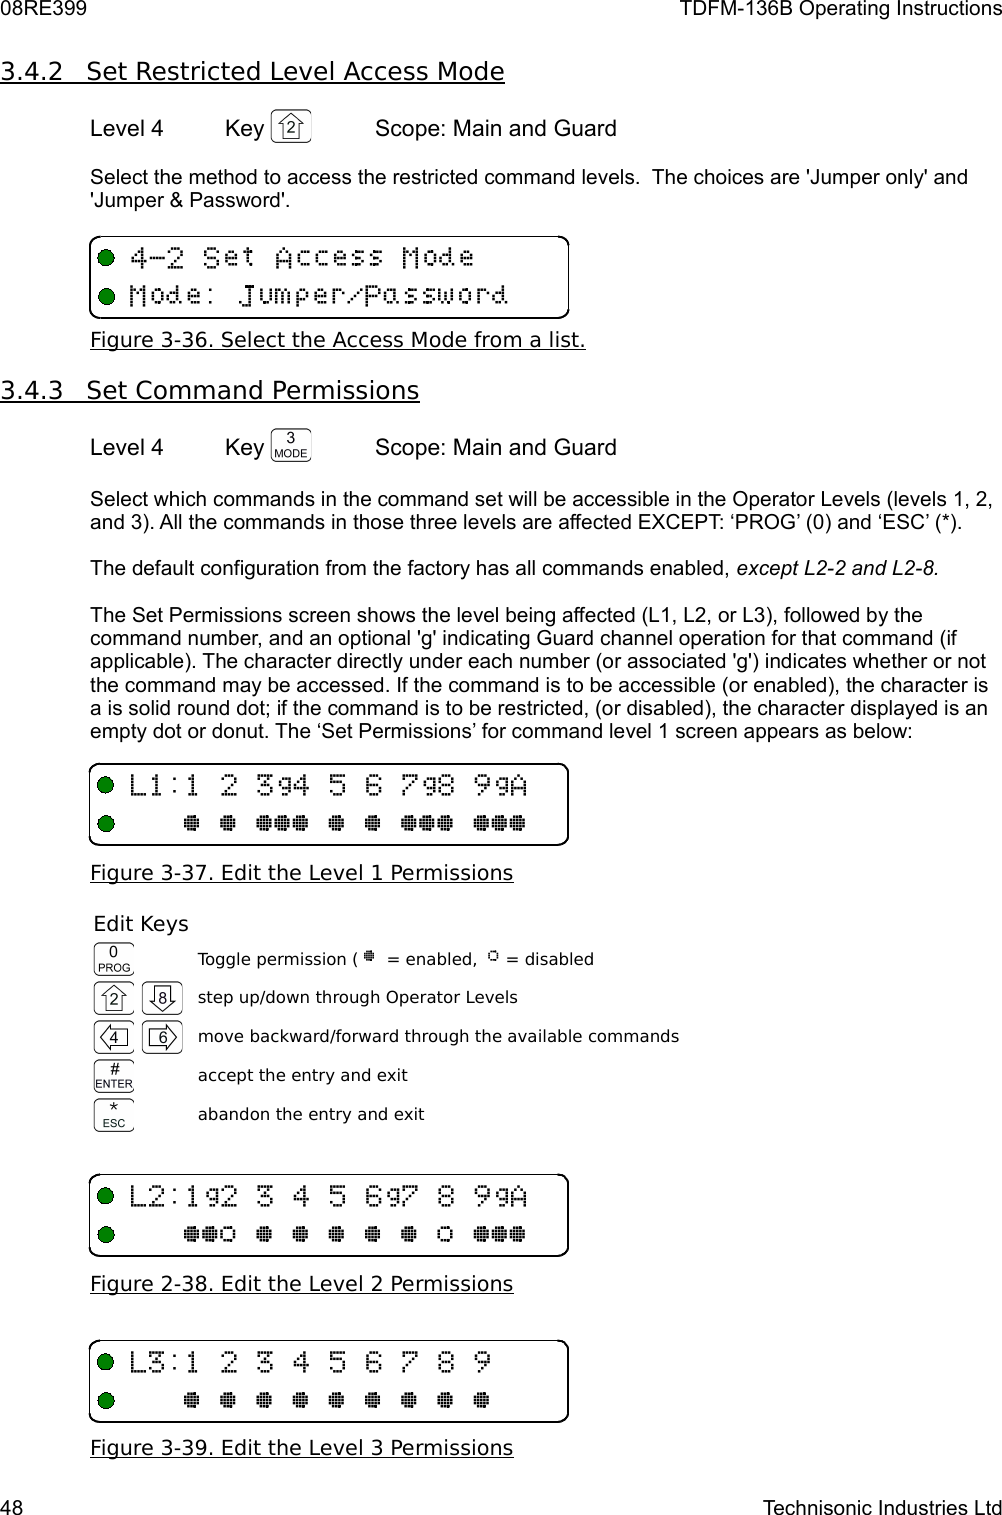 08RE399 TDFM-136B Operating Instructions3.4.2         Set Restricted Level Access Mode   Level 4 Key  Scope: Main and GuardSelect the method to access the restricted command levels.  The choices are &apos;Jumper only&apos; and &apos;Jumper &amp; Password&apos;.Figure 3-36. Select the Access Mode from a list.3.4.3         Set Command Permissions   Level 4 Key  Scope: Main and GuardSelect which commands in the command set will be accessible in the Operator Levels (levels 1, 2, and 3). All the commands in those three levels are affected EXCEPT: ‘PROG’ (0) and ‘ESC’ (*). The default configuration from the factory has all commands enabled, except L2-2 and L2-8.The Set Permissions screen shows the level being affected (L1, L2, or L3), followed by the command number, and an optional &apos;g&apos; indicating Guard channel operation for that command (if applicable). The character directly under each number (or associated &apos;g&apos;) indicates whether or not the command may be accessed. If the command is to be accessible (or enabled), the character is a is solid round dot; if the command is to be restricted, (or disabled), the character displayed is an empty dot or donut. The ‘Set Permissions’ for command level 1 screen appears as below: Figure 3-37. Edit the Level 1 PermissionsEdit KeysToggle permission ( @  = enabled,  A = disabledstep up/down through Operator Levelsmove backward/forward through the available commandsaccept the entry and exitabandon the entry and exitFigure 2-38. Edit the Level 2 PermissionsFigure 3-39. Edit the Level 3 Permissions48 Technisonic Industries Ltd-/1B40BC#B6@@@@@@@@@@@@@-1/B14B0C#B6@@A@@@@@A@@@-/140C#@@@@@@@@@4&quot;1+6  /W39M5